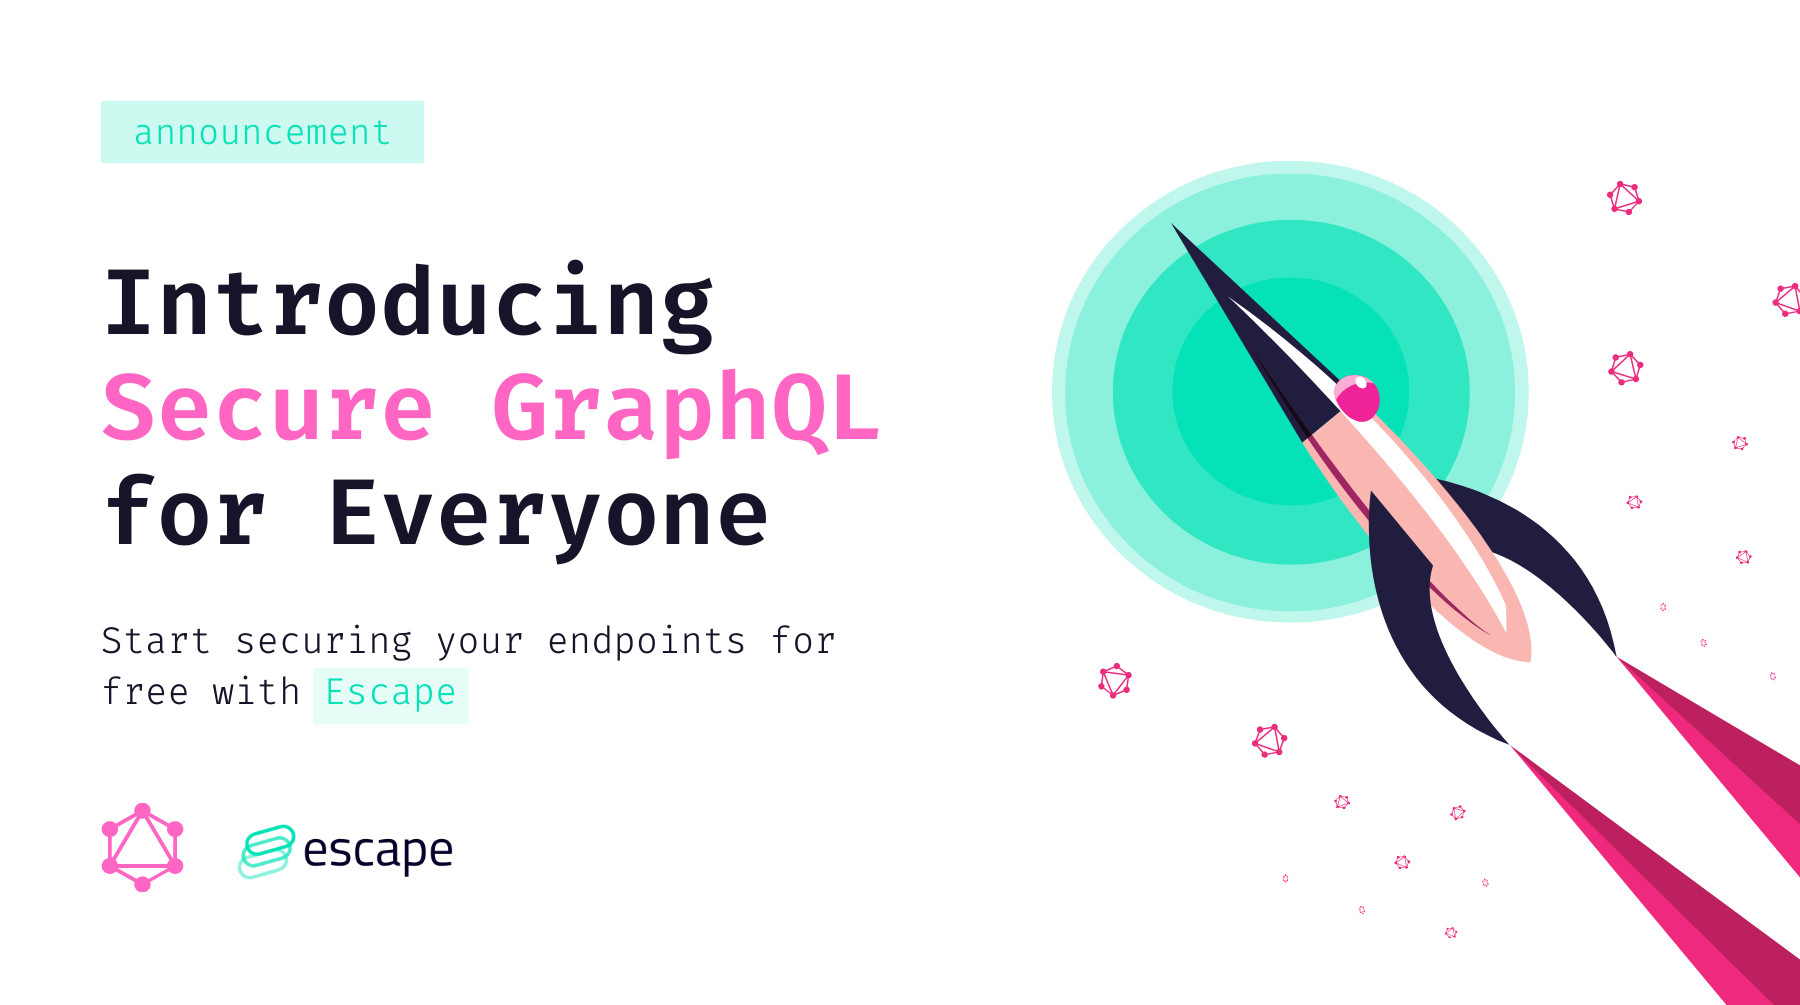 Introducing Secure GraphQL for Everyone